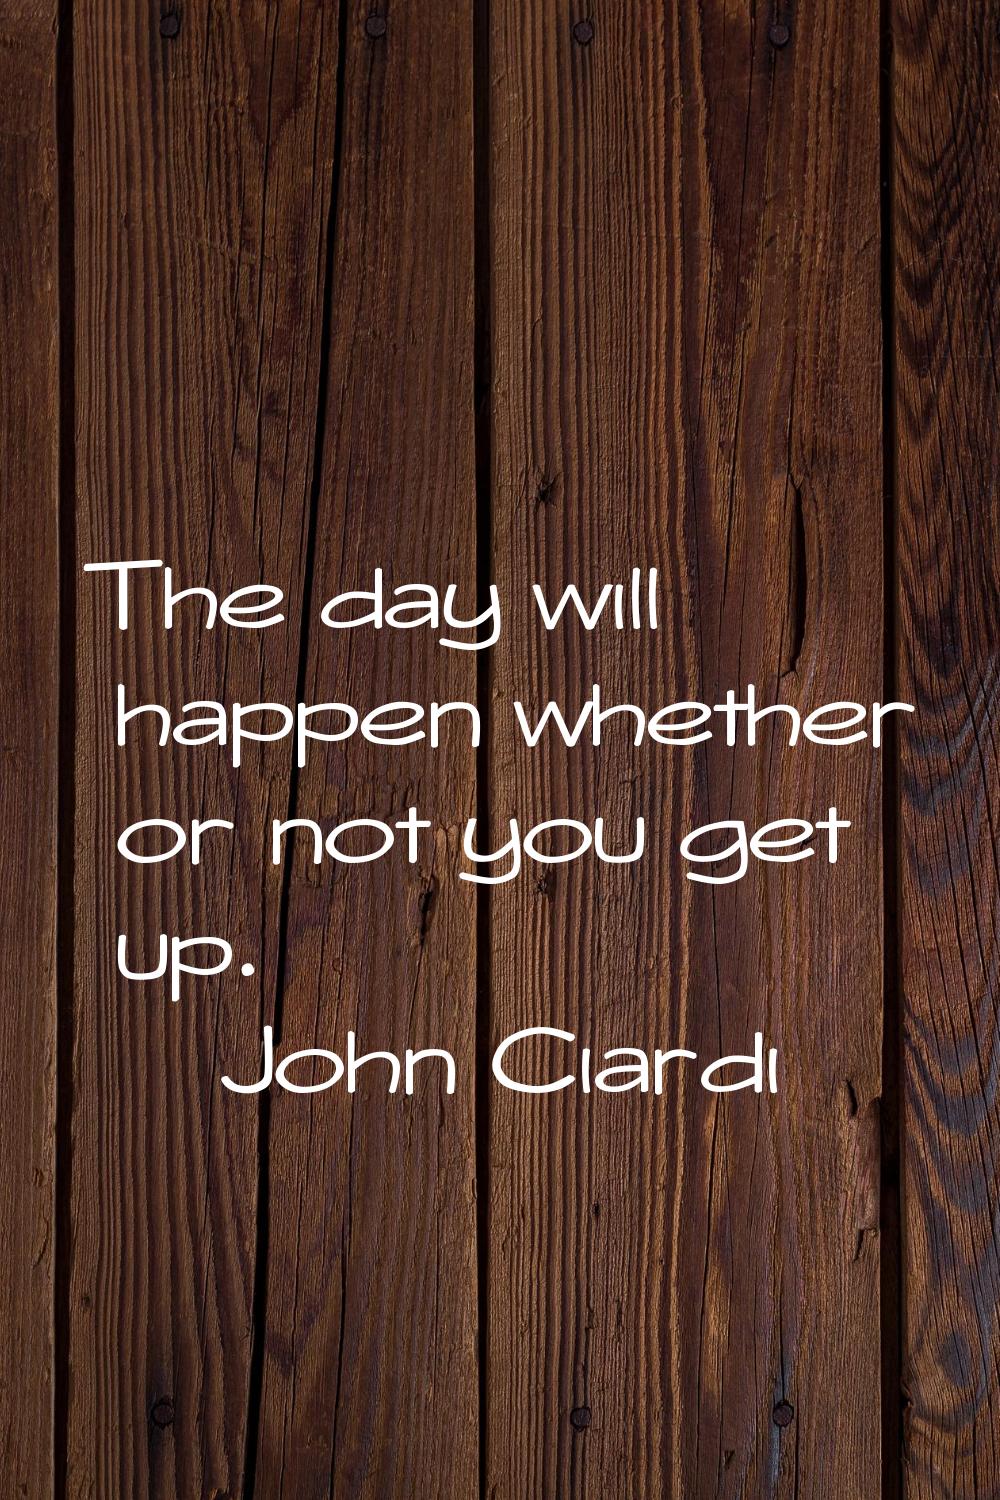 The day will happen whether or not you get up.